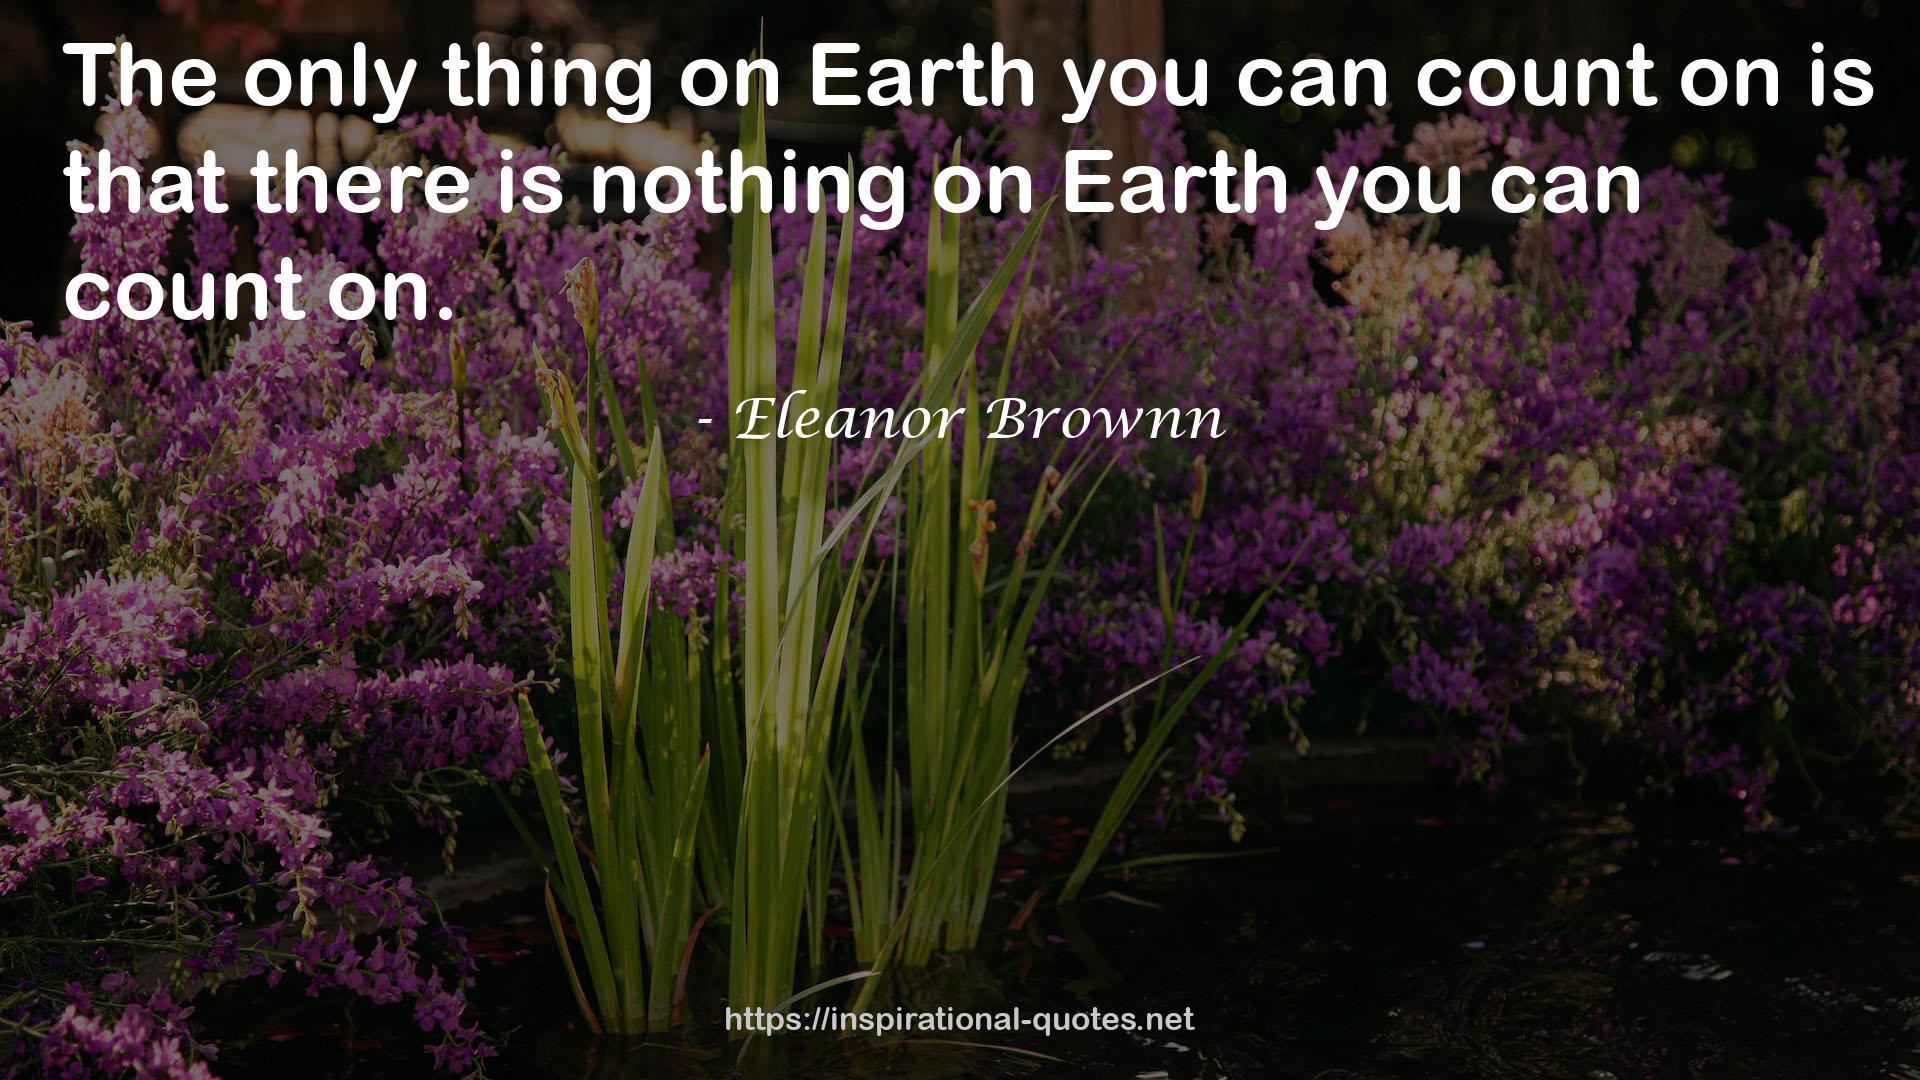 Eleanor Brownn QUOTES